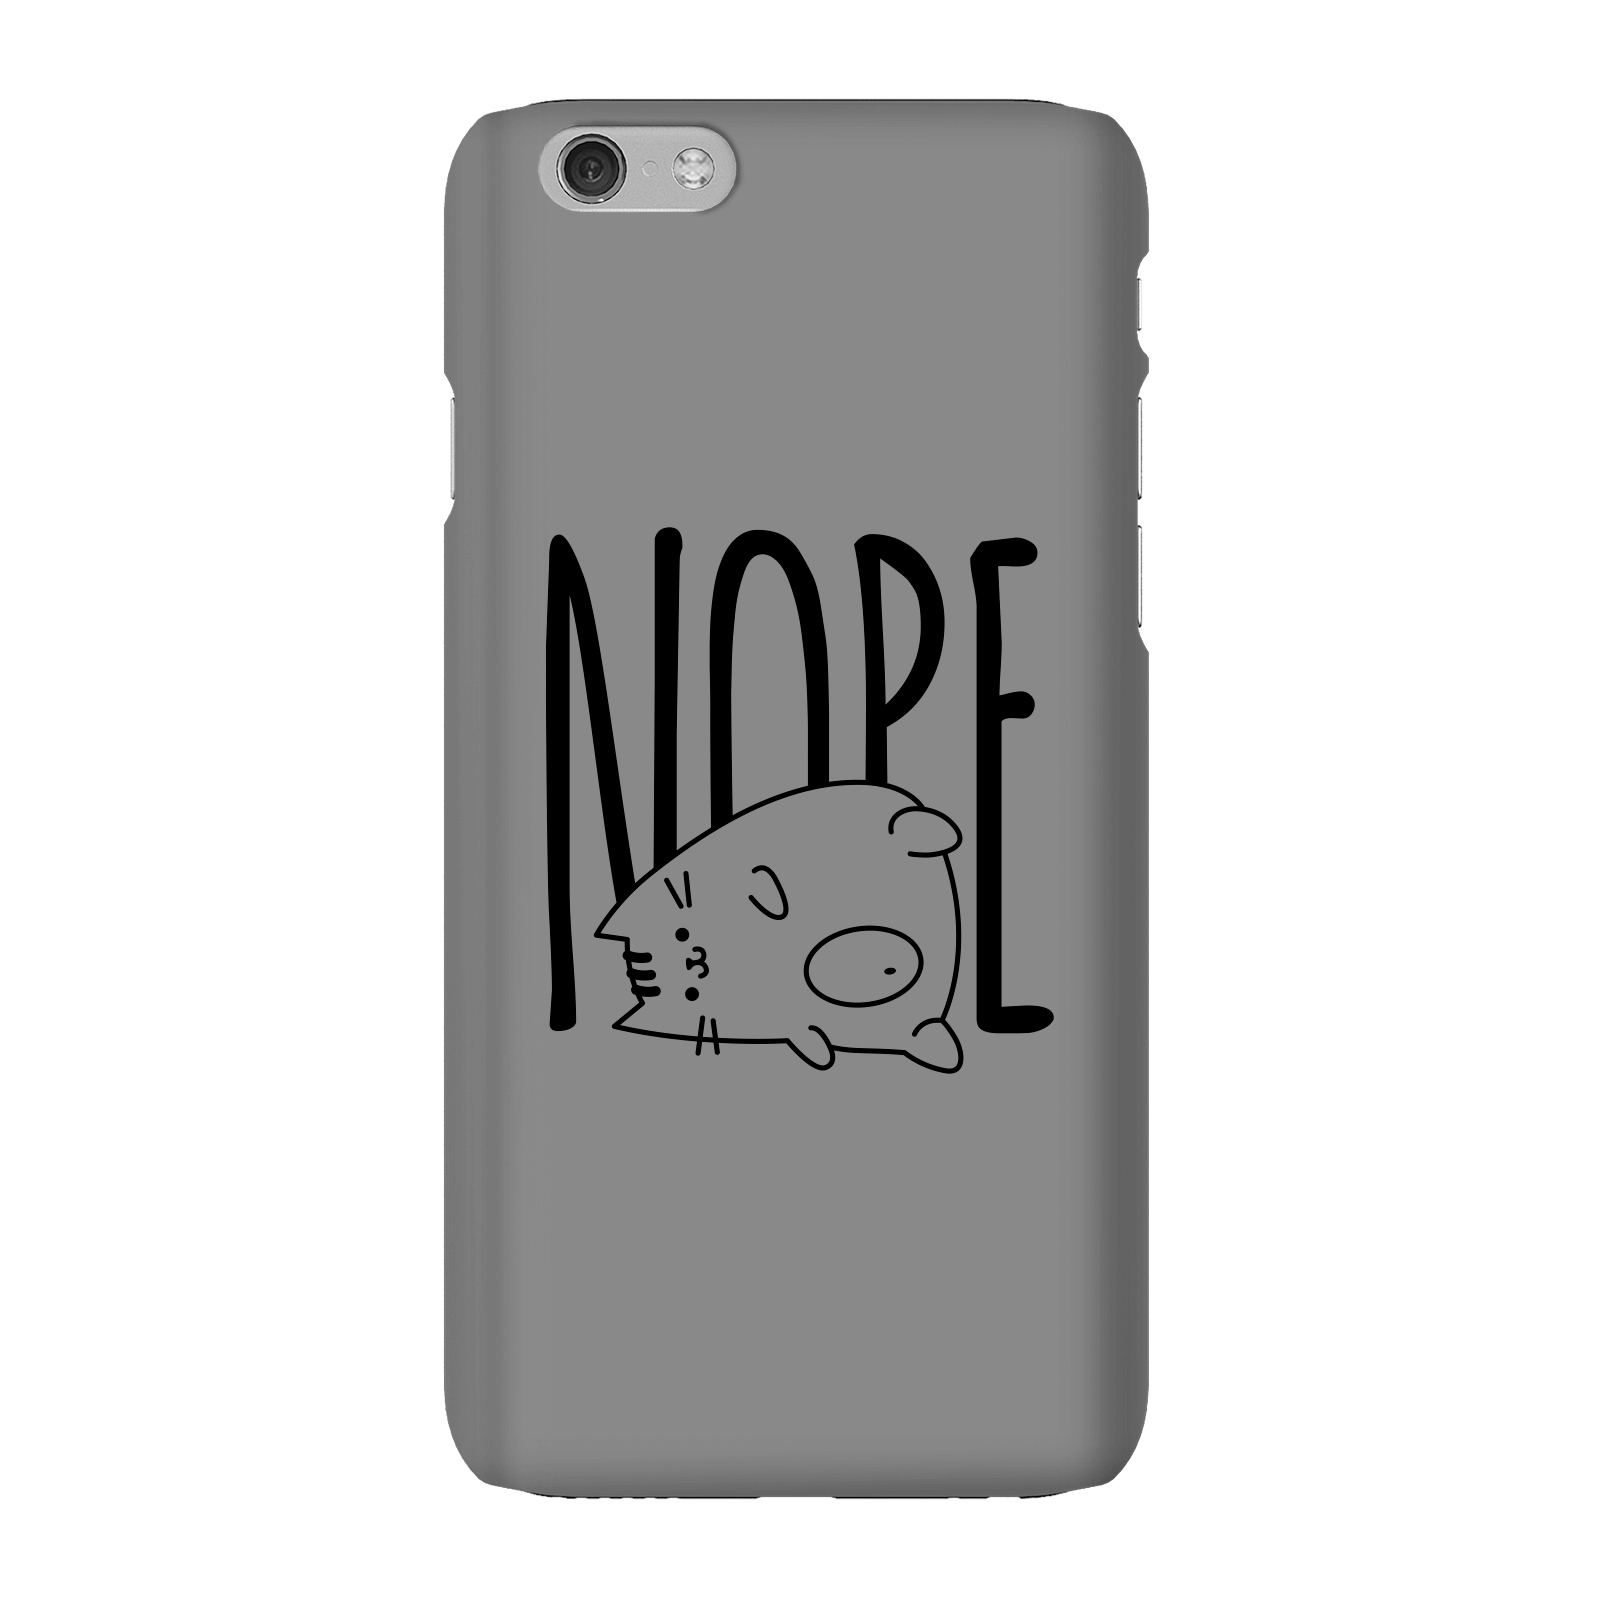 Nope Phone Case for iPhone and Android - iPhone 6 - Snap Case - Matte